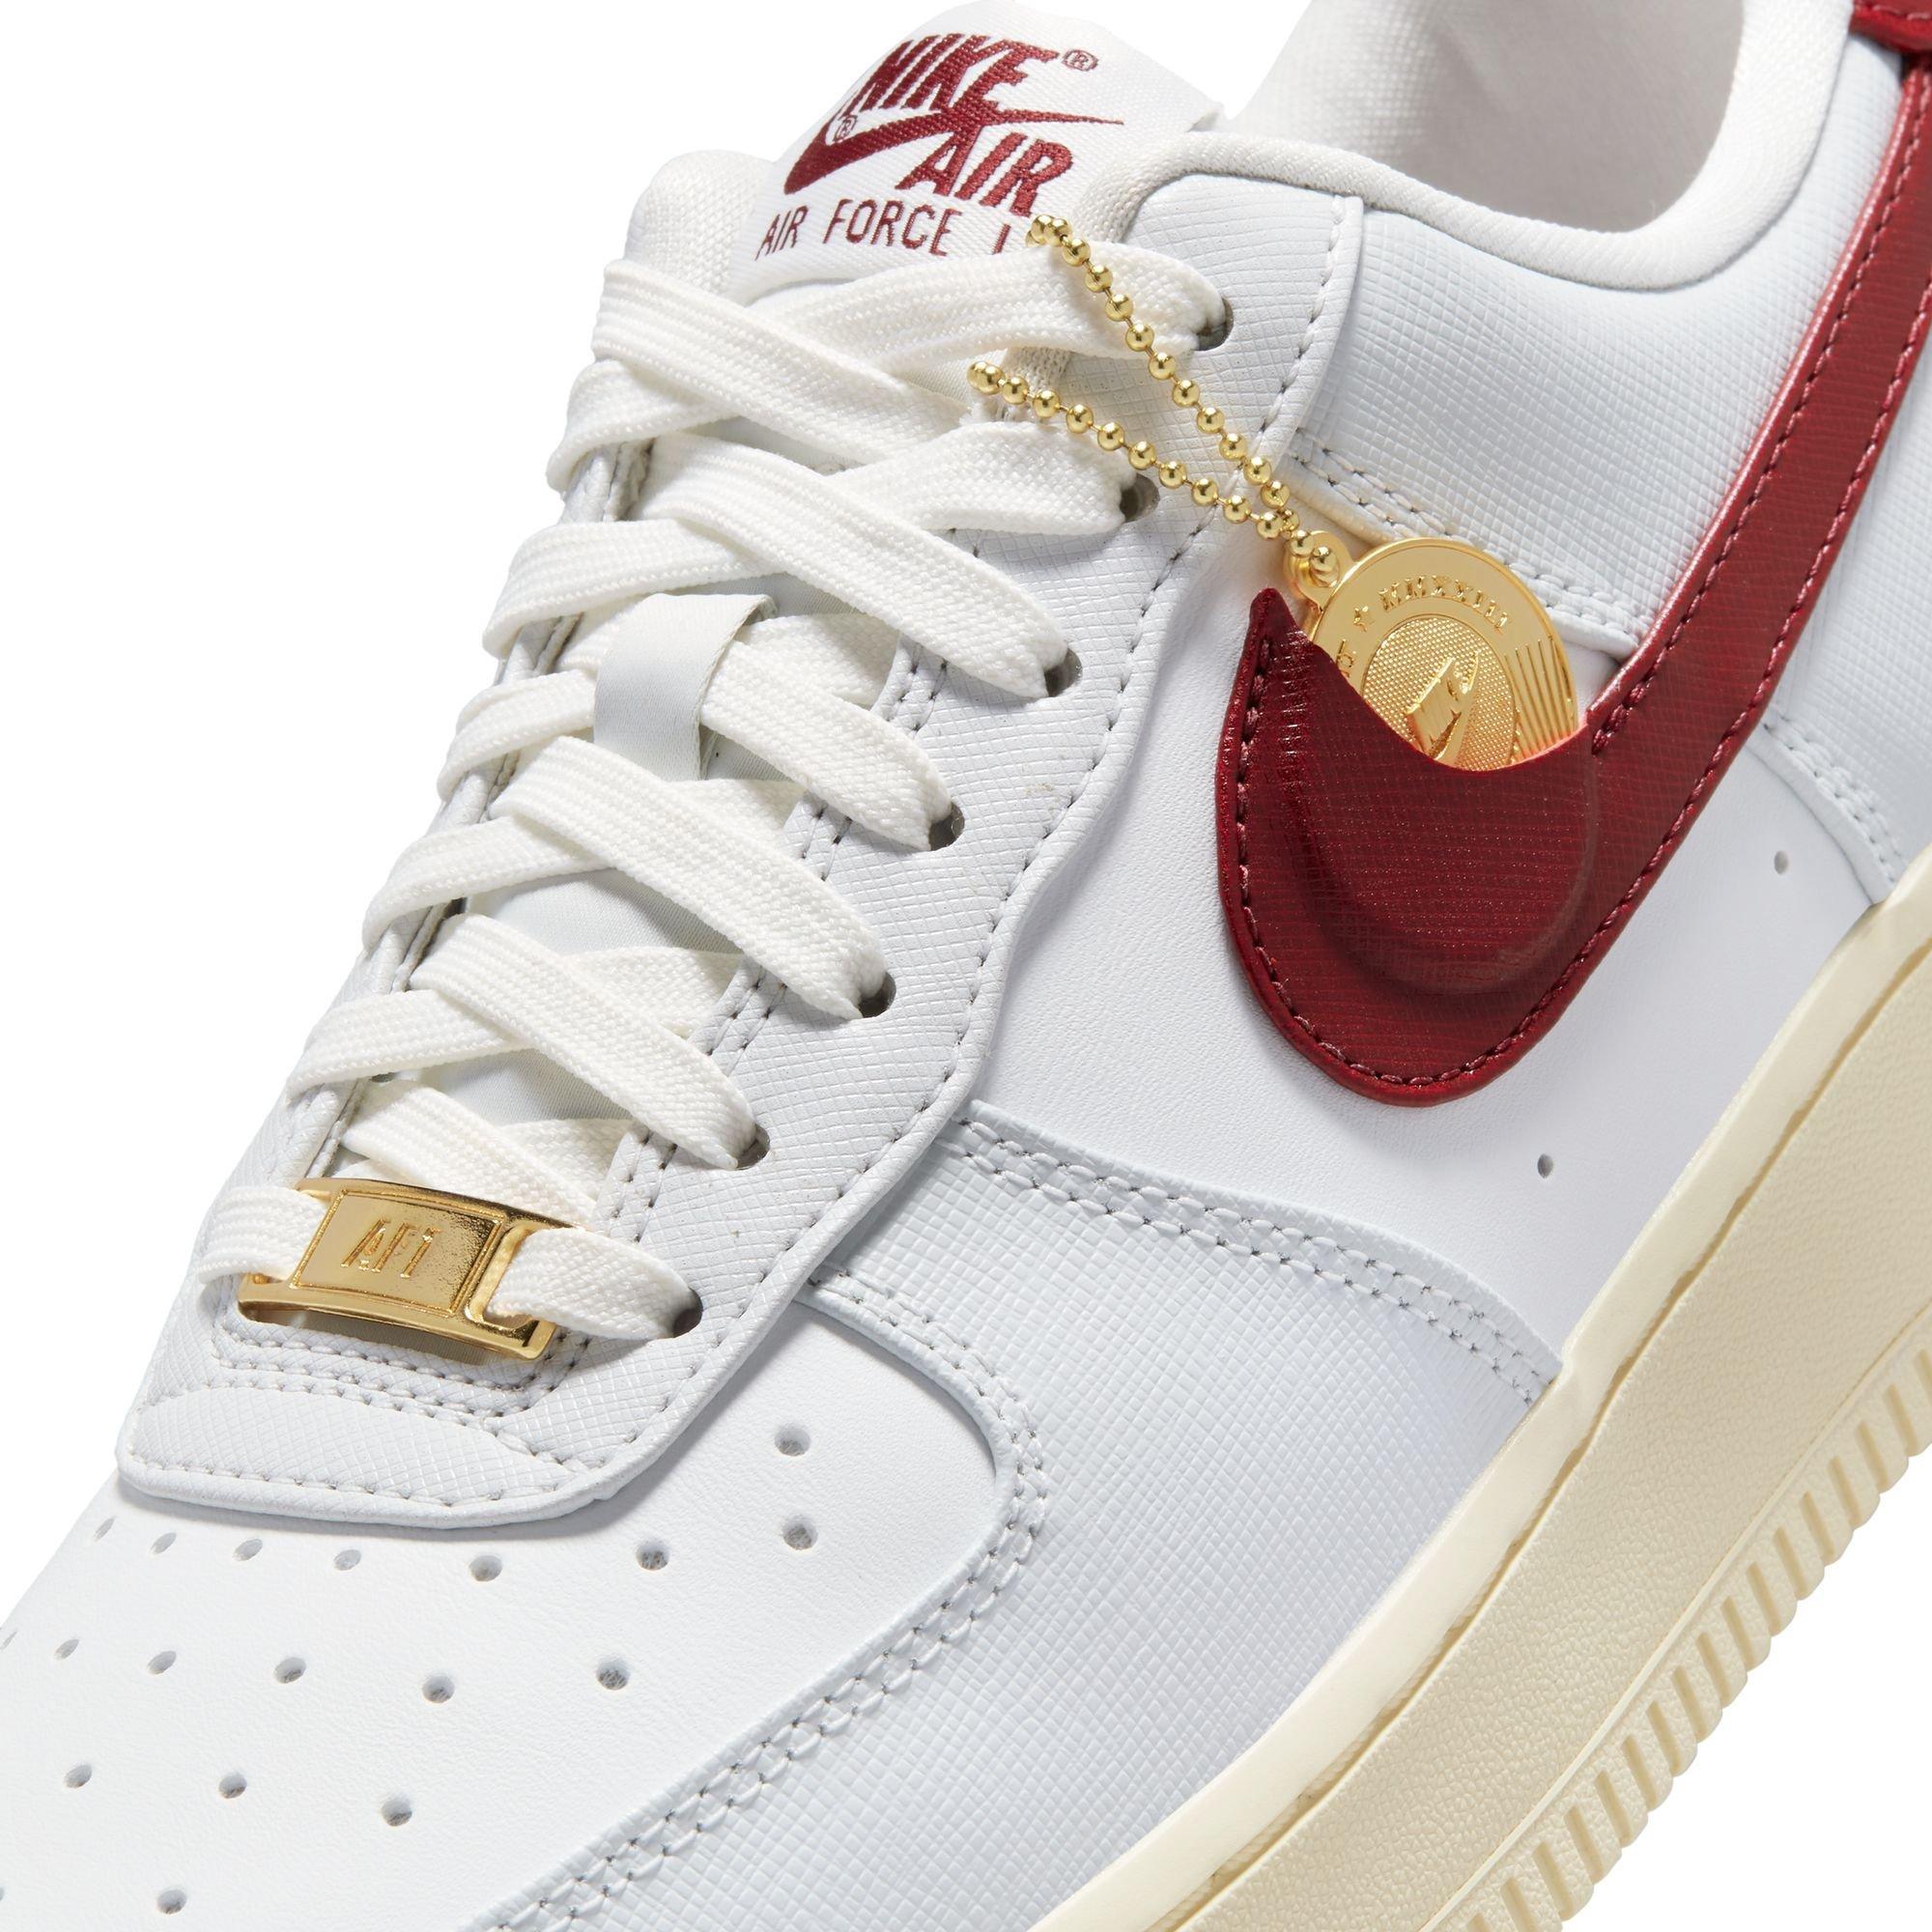 Nike Wmns Air Force 1 '07 SE 'First Use - University Gold Gum' | Women's Size 5.5